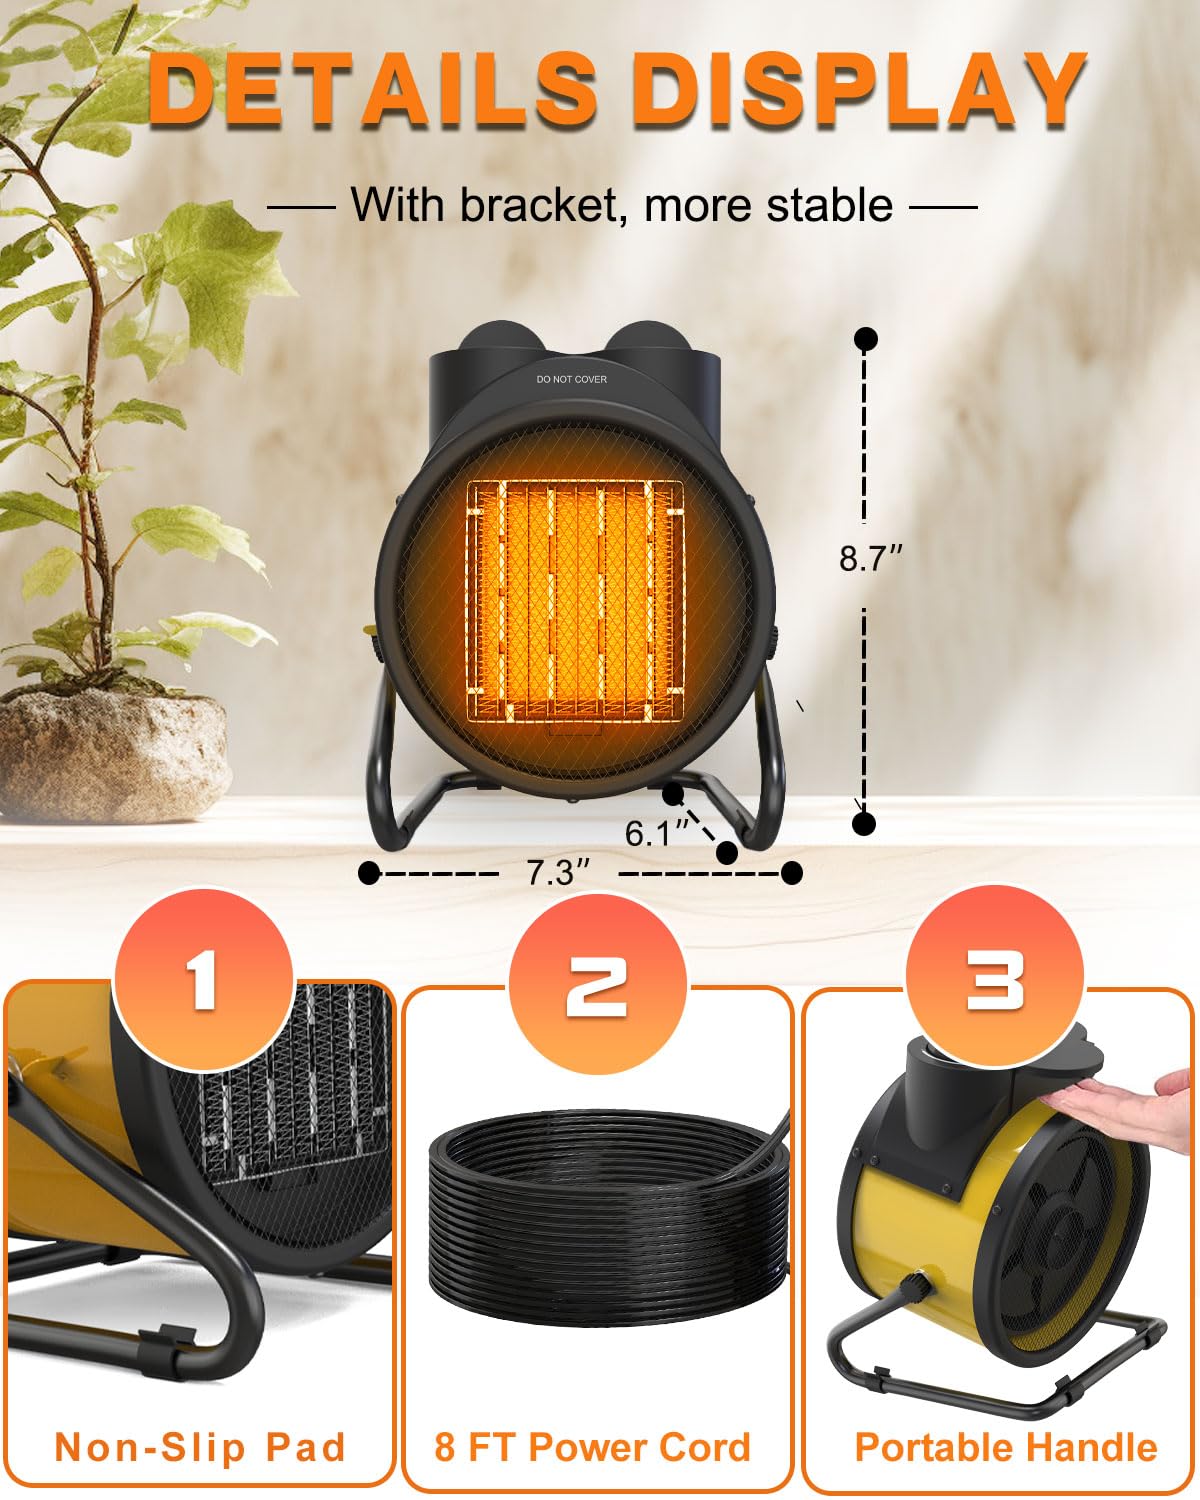 Outdoor Patio Heater - 1500W PTC Electric Garage Heater with Thermostat, 2S Fast Heating Ceramic Heater, 3 Modes Portable Small Fan Heaters for Patio, Garage, Greenhouse and Indoor Use